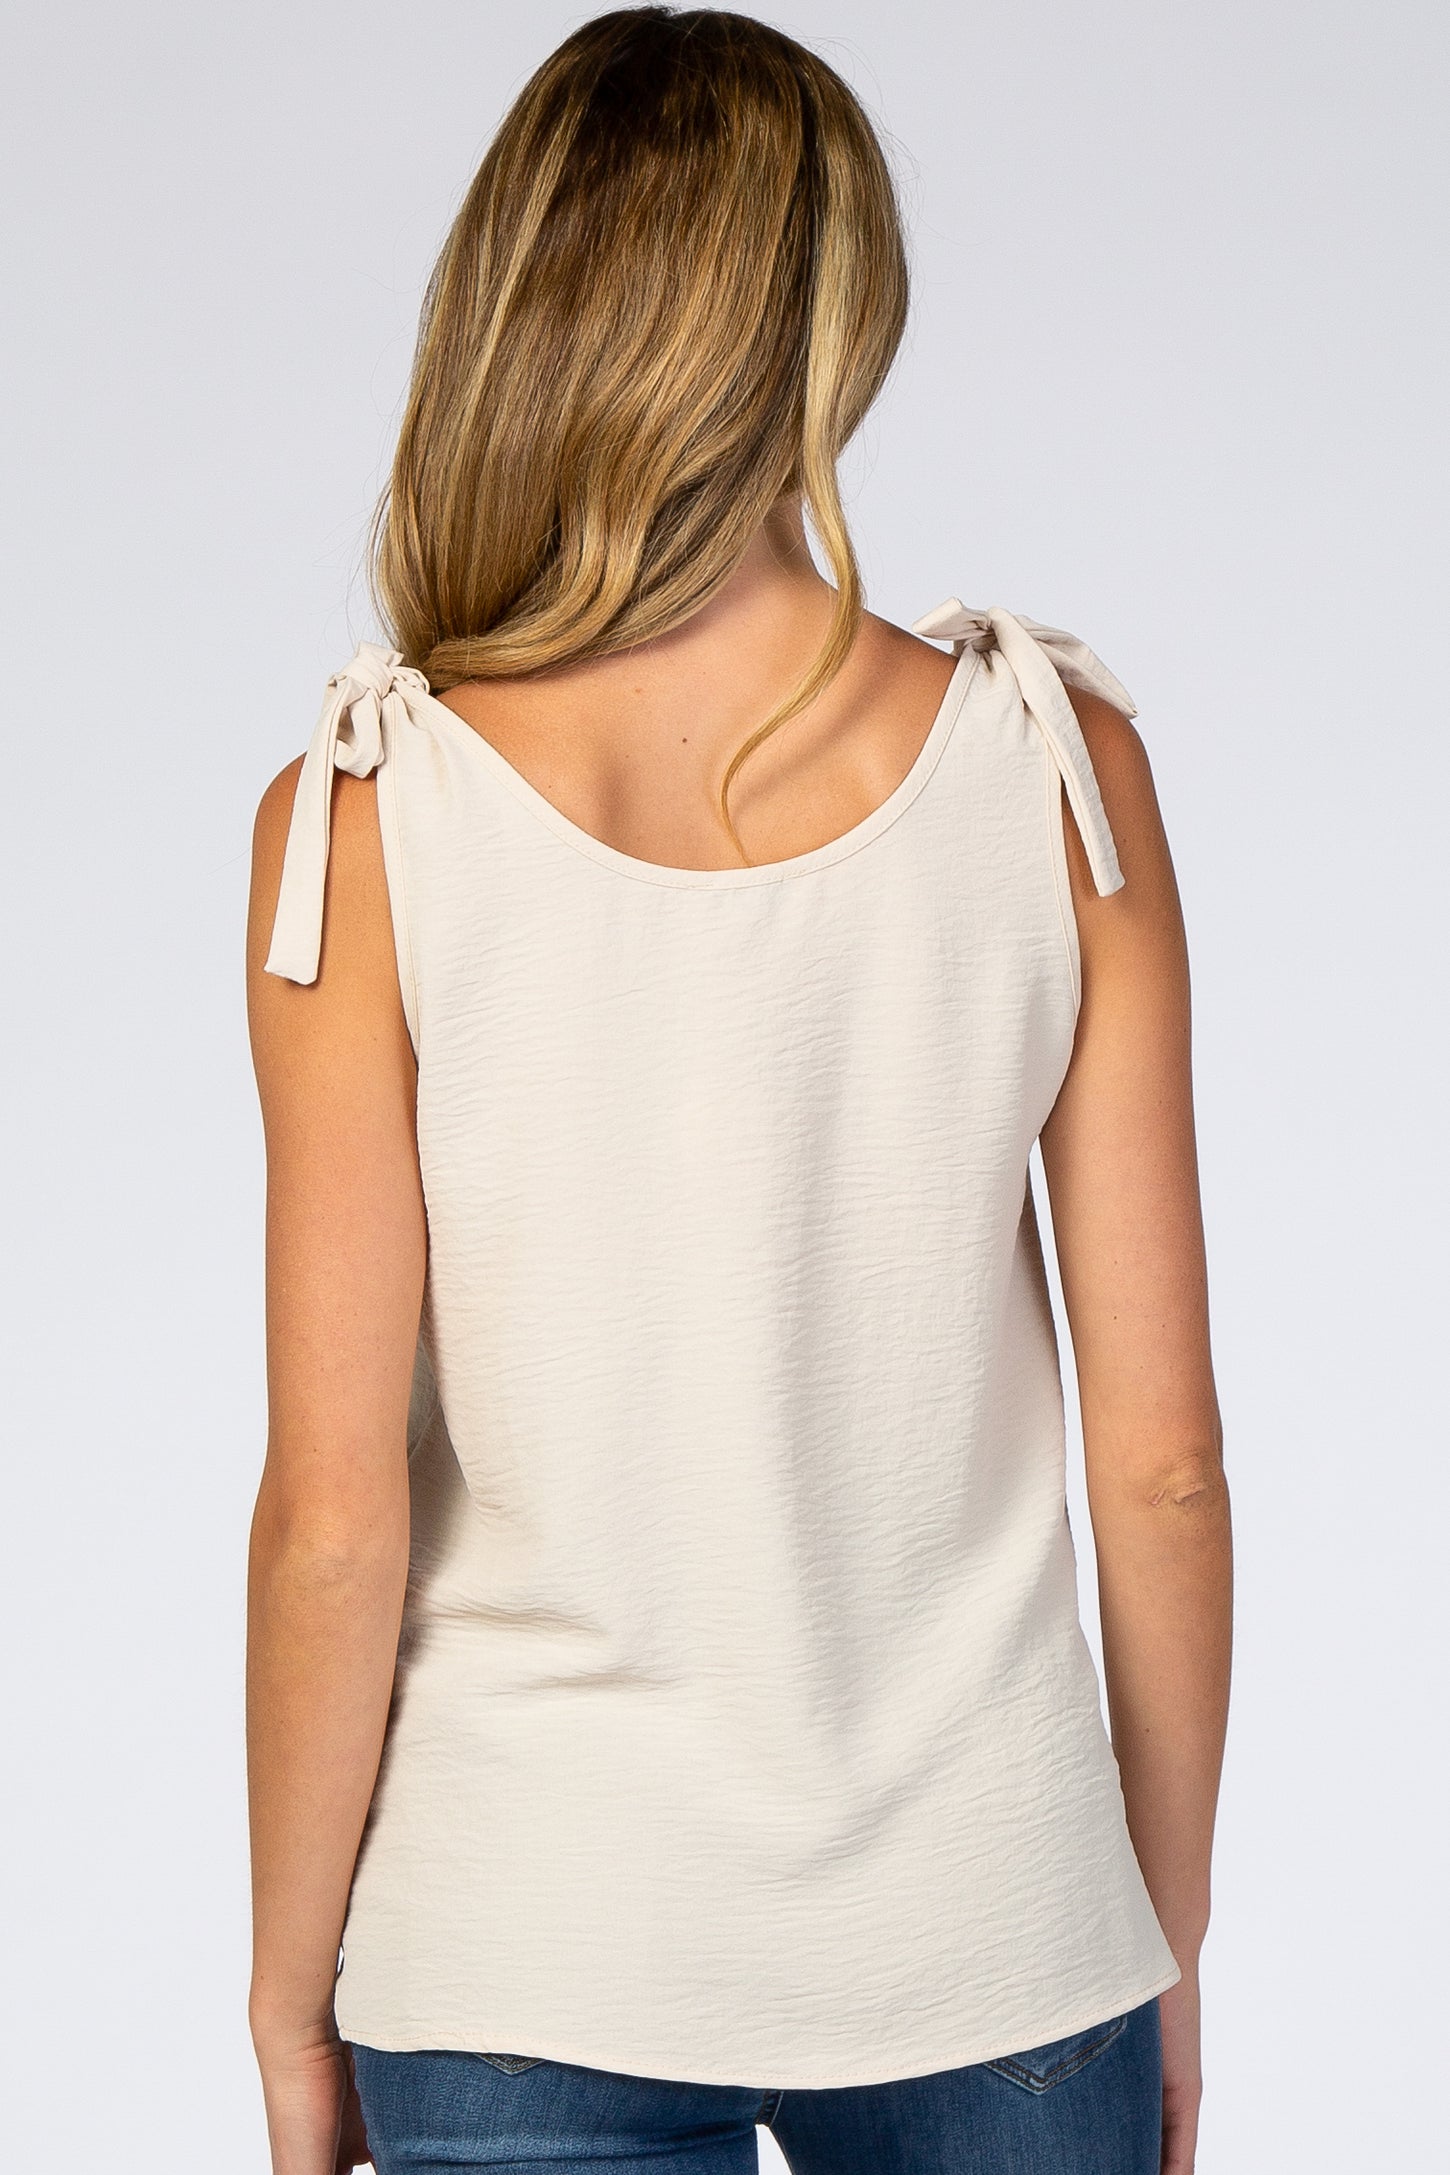 Beige Knot Accent Sleeveless Maternity Top